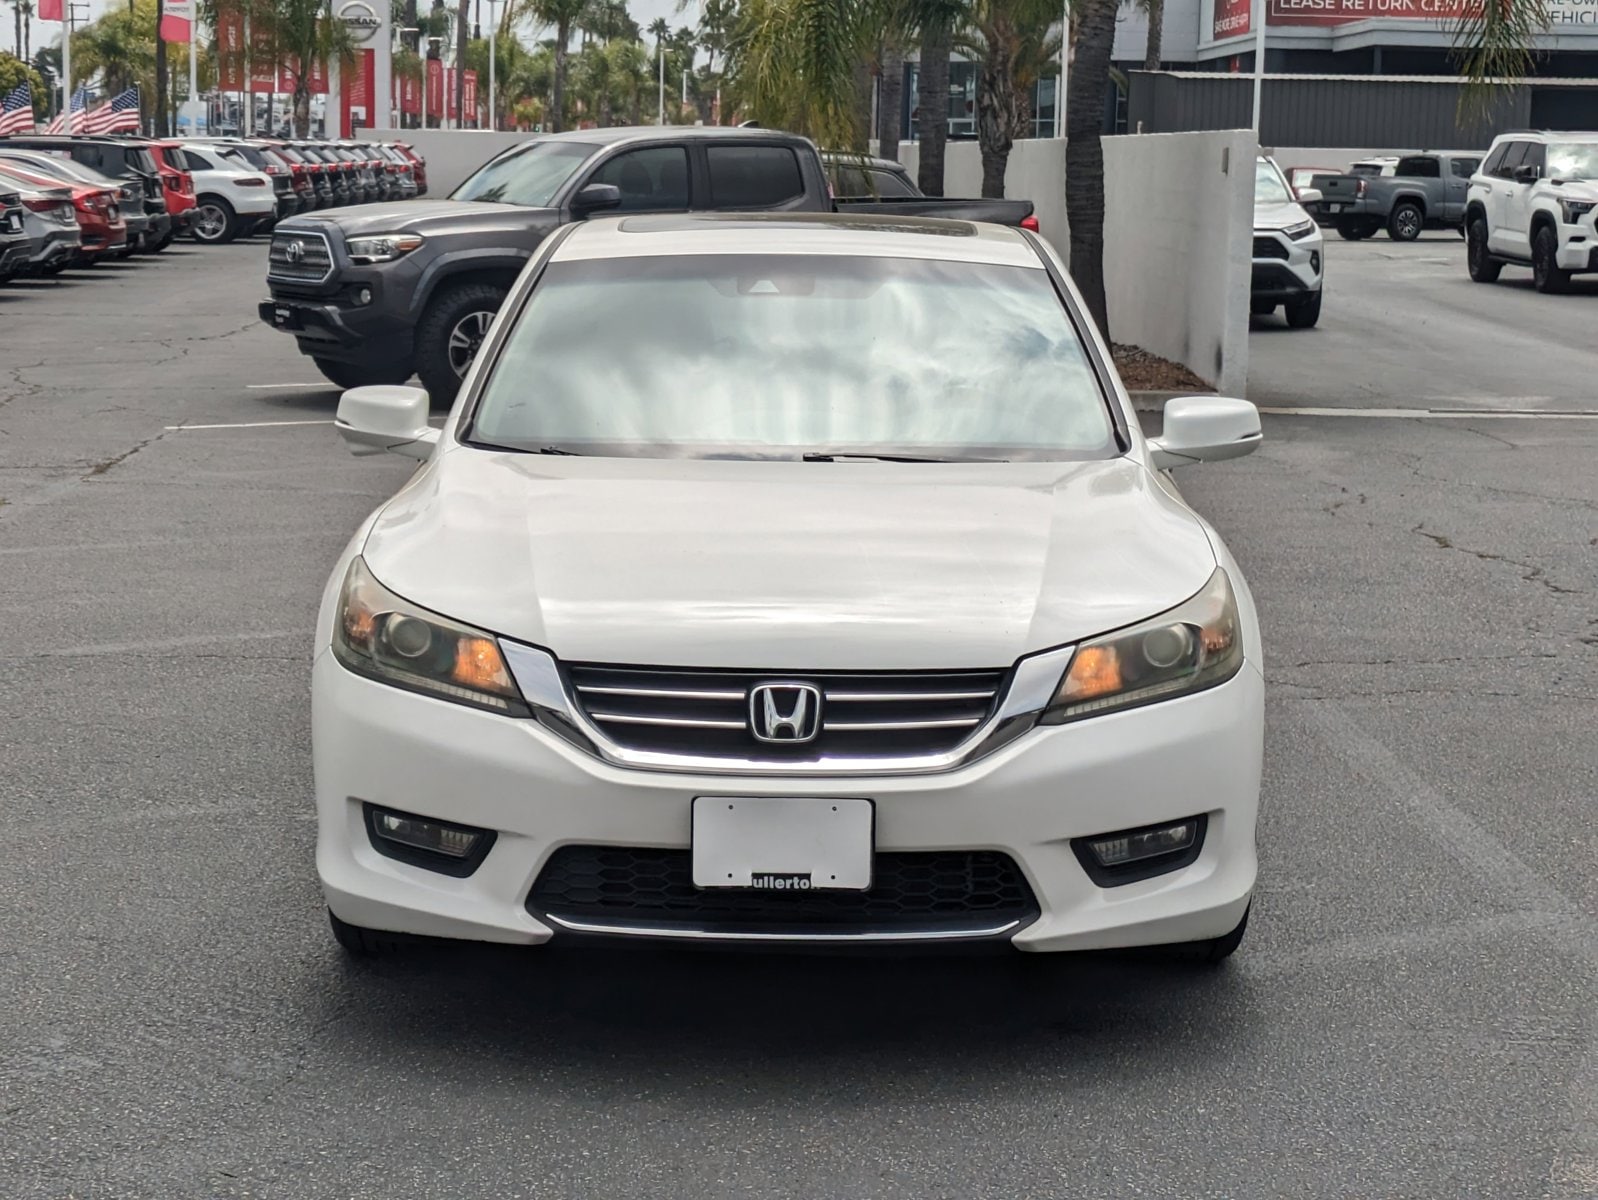 Used 2014 Honda Accord EX-L with VIN 1HGCR2F87EA024083 for sale in Chandler, AZ